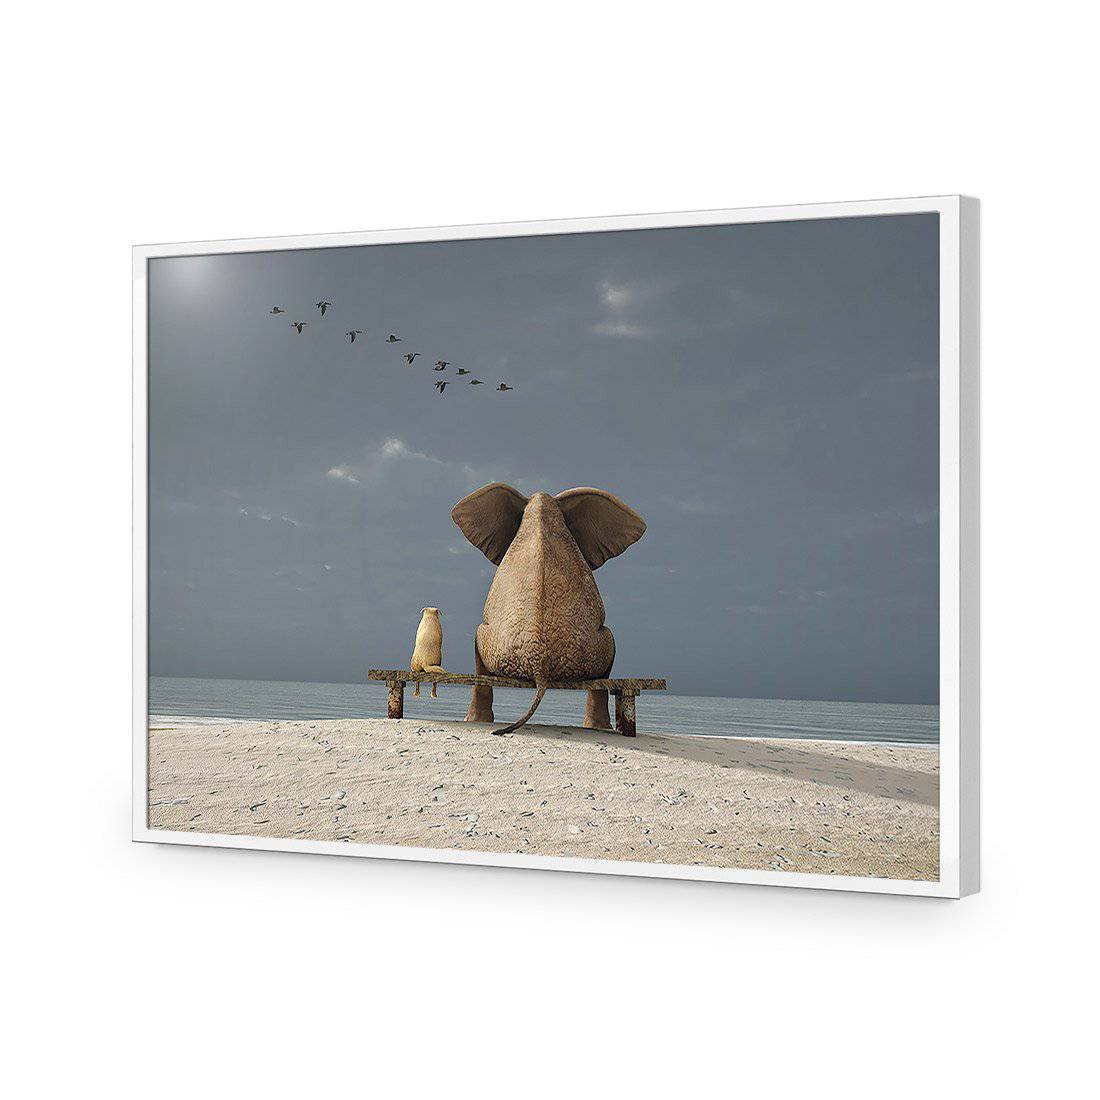 Little And Large-Acrylic-Wall Art Design-Without Border-Acrylic - White Frame-45x30cm-Wall Art Designs